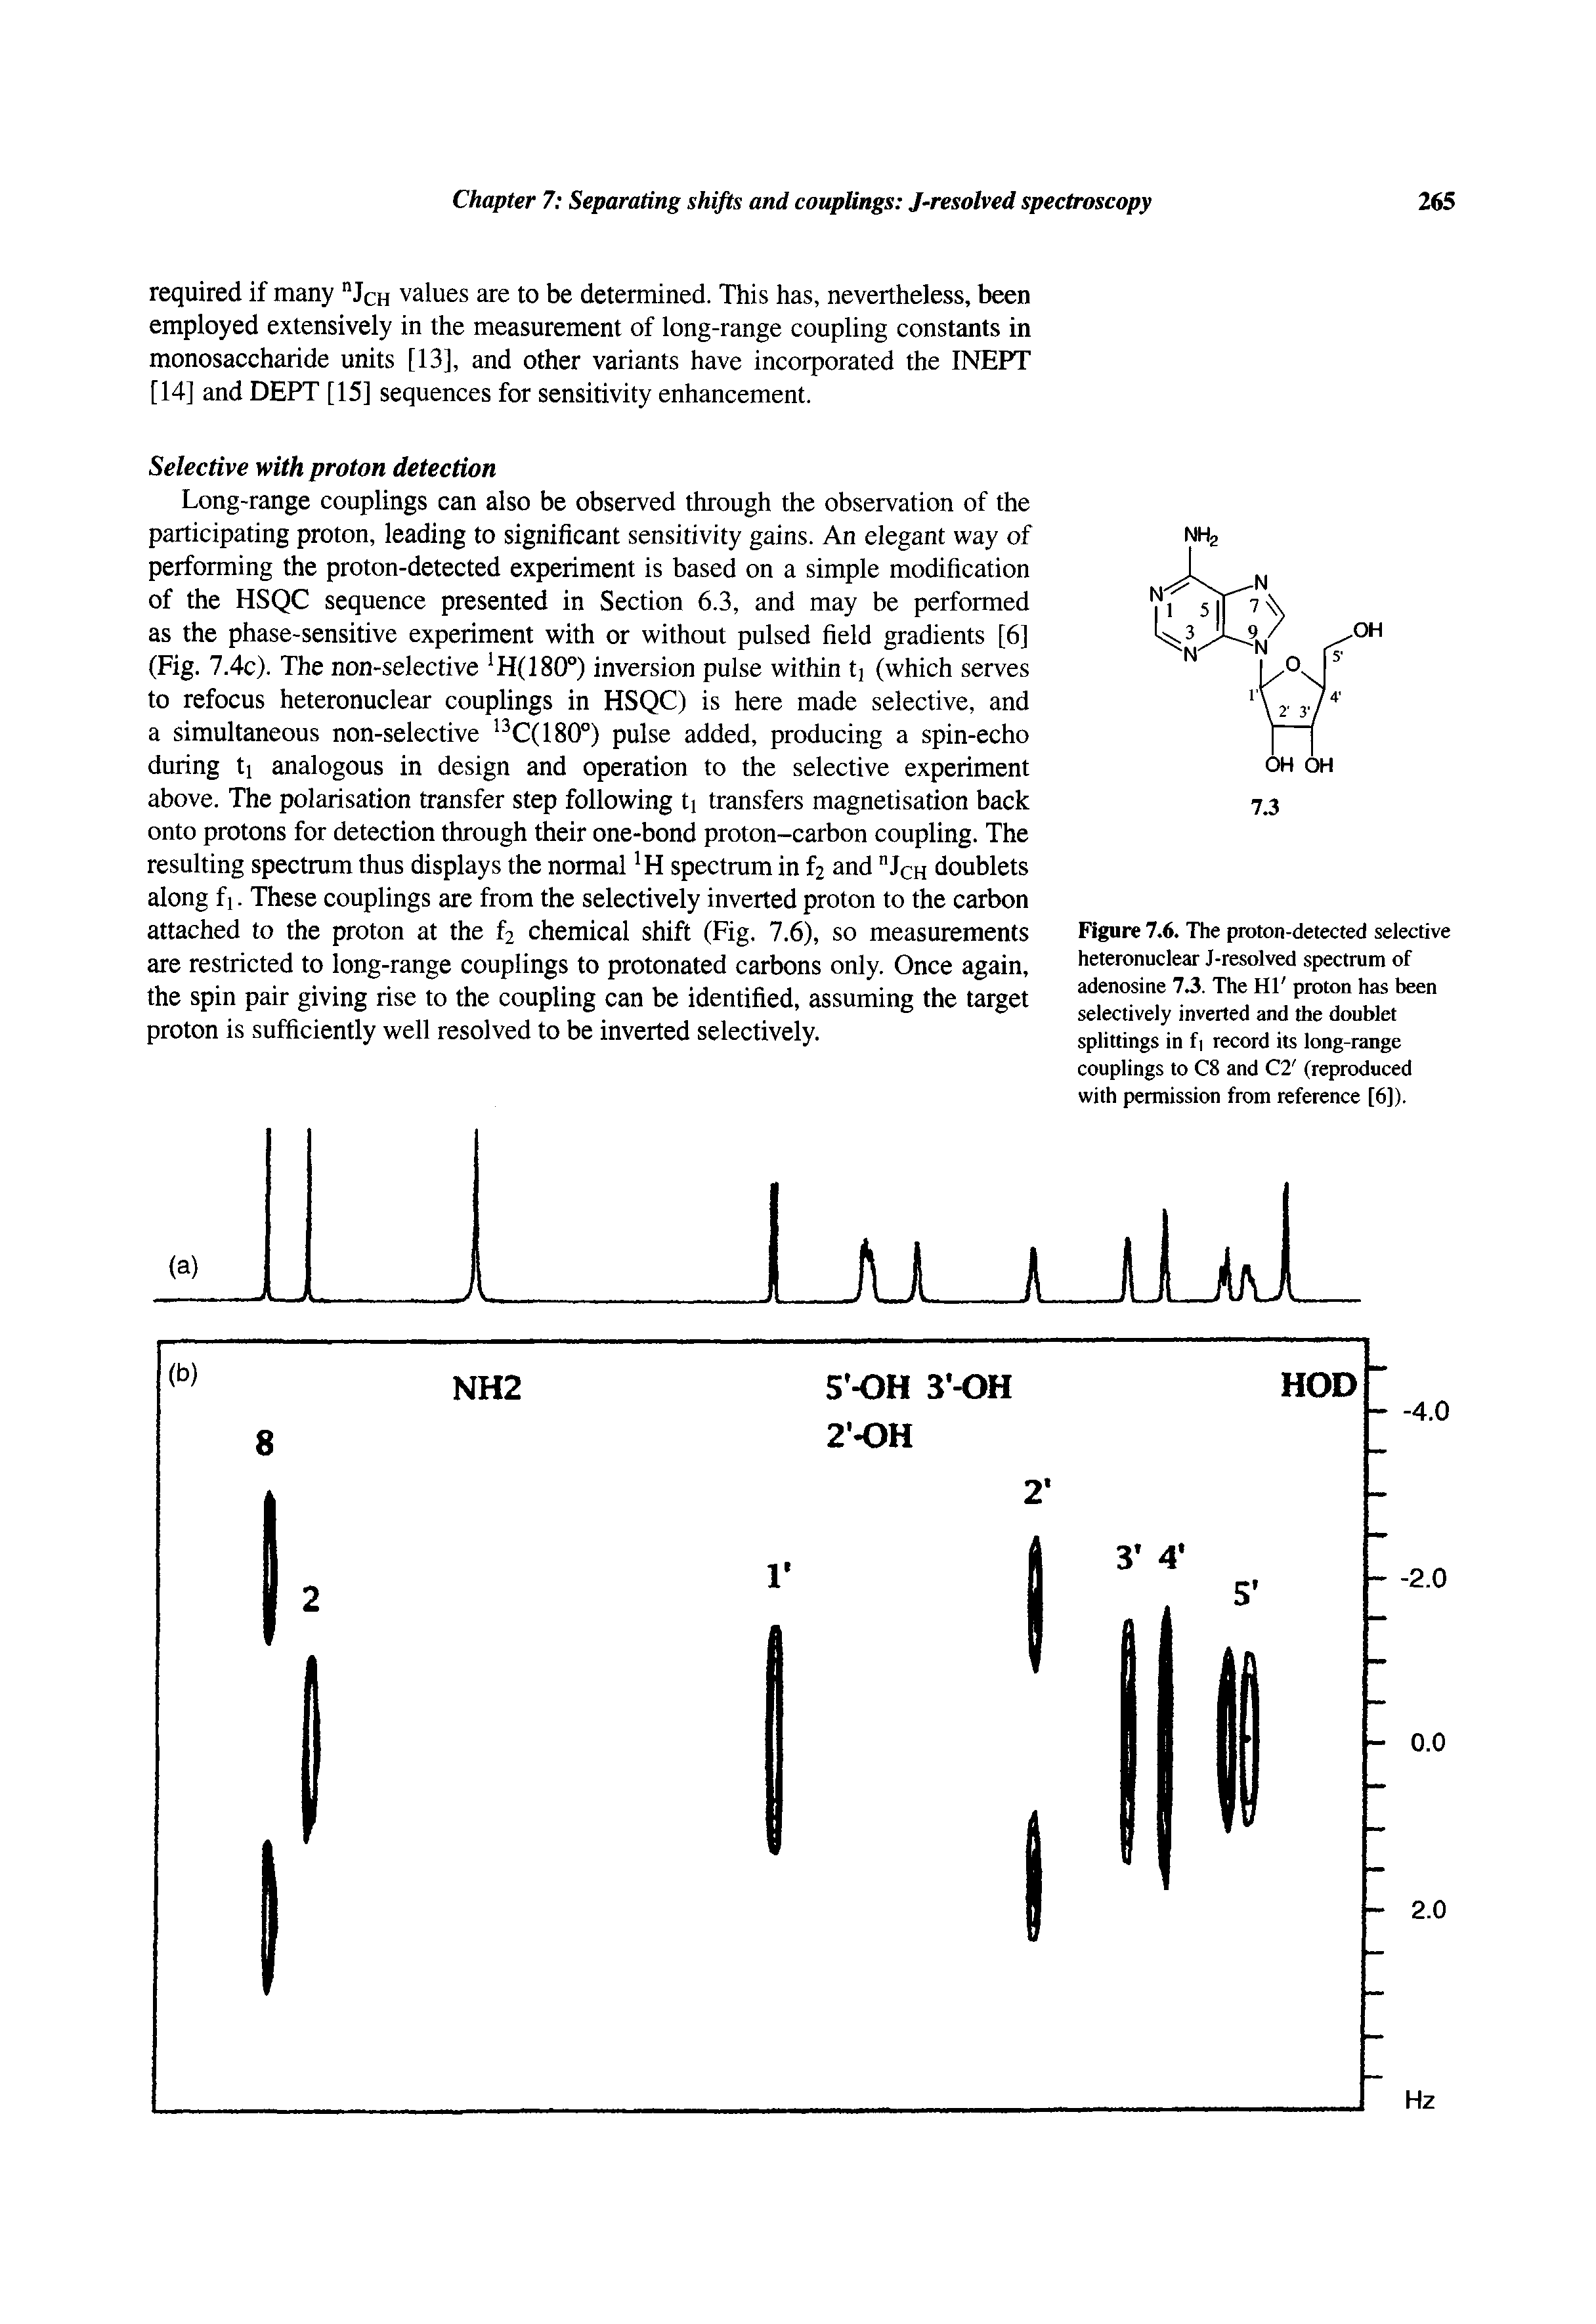 Figure 7.6. The proton-detected selective heteronuclear J-resolved spectrum of adenosine 73. The HI proton has been selectively inverted and the doublet splittings in f record its long-range couplings to C8 and C2 (reproduced with permission from reference [6]).